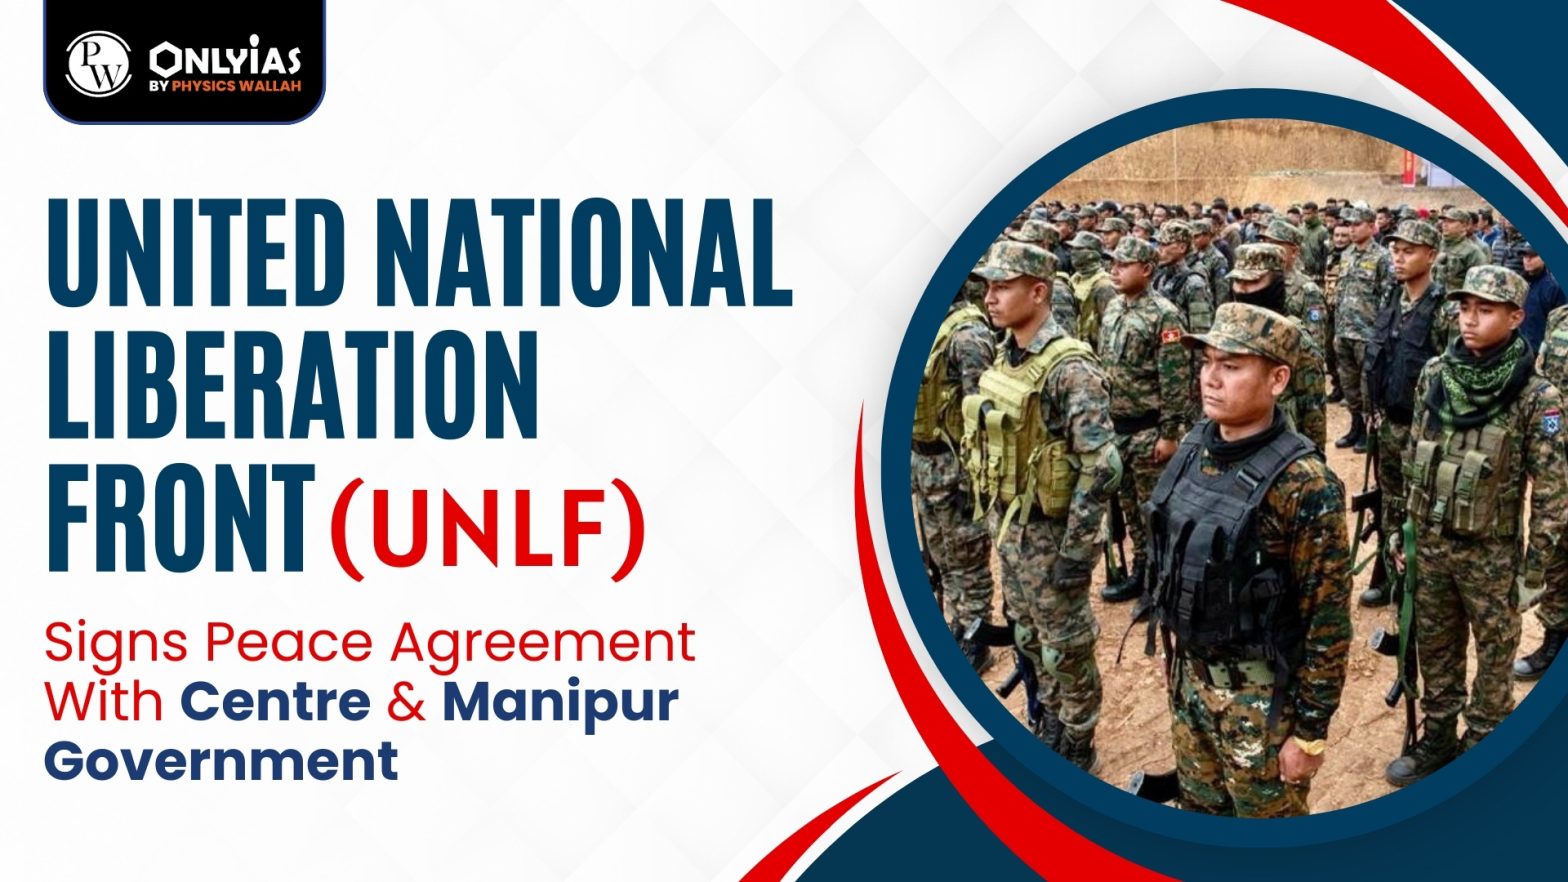 United National Liberation Front (UNLF) Signs Peace Agreement With Centre & Manipur Government